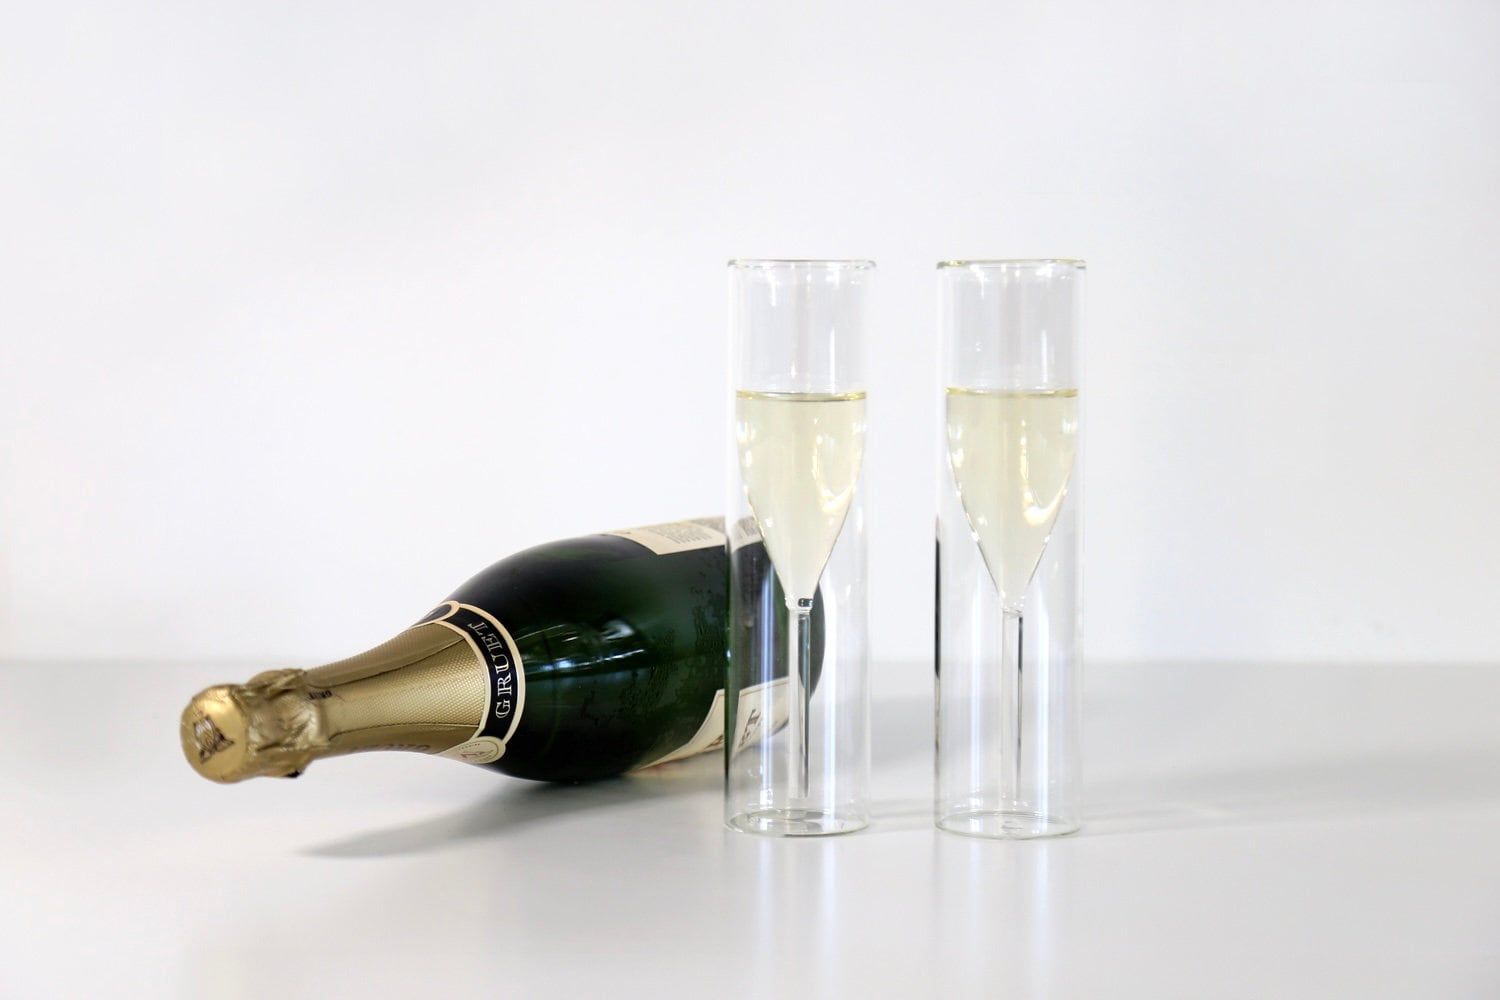 Double Layered Champagne Glass | Kitchen and wine cellar accessories | Party and Event supplies | Housewarming Gifts